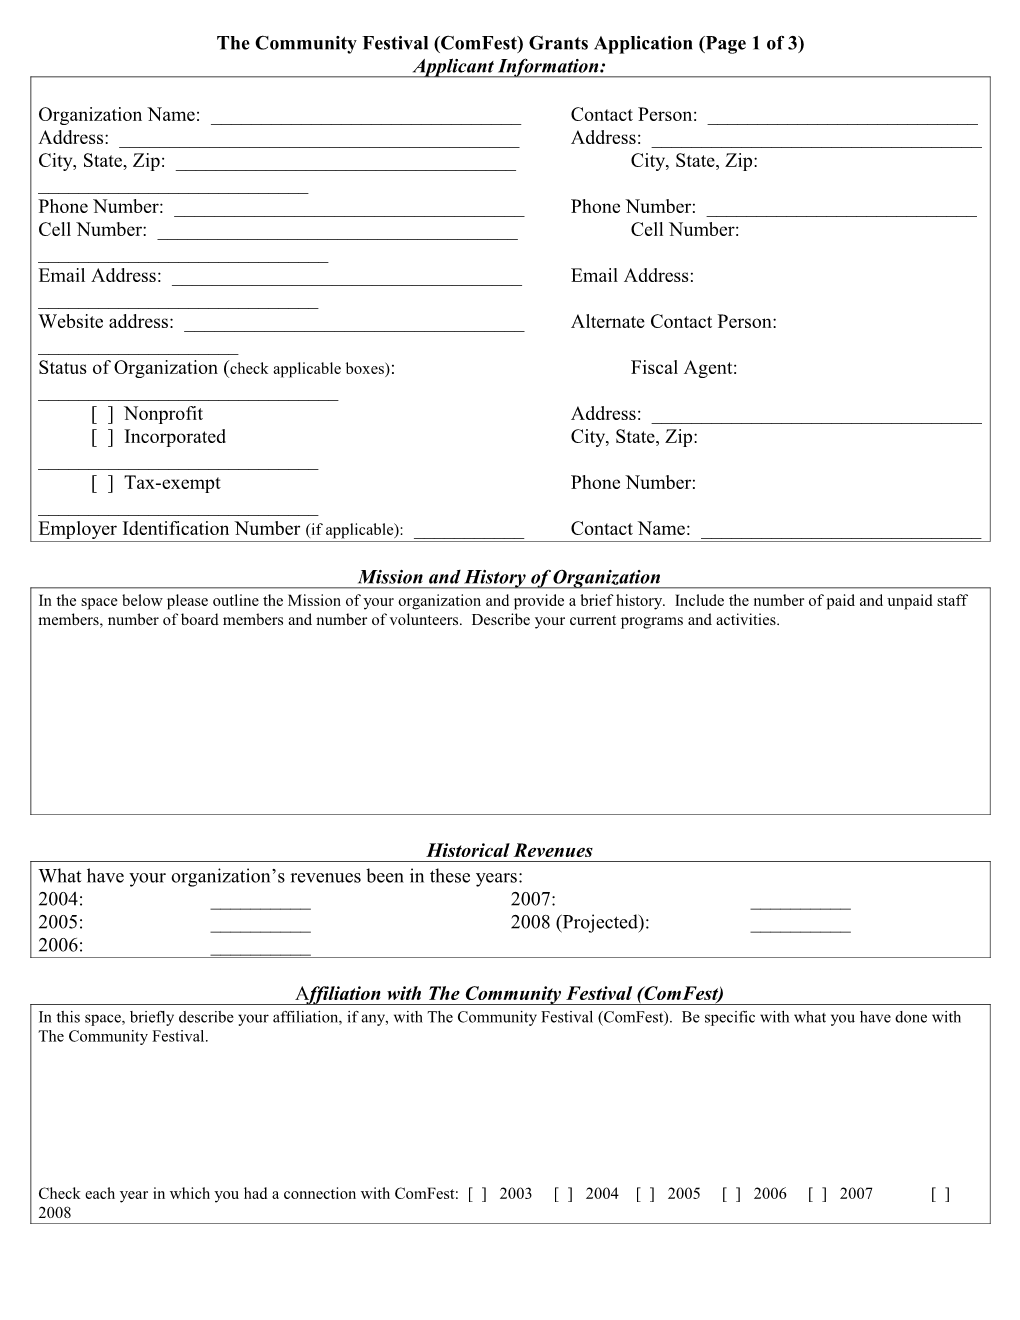 The Community Festival (Comfest) Grants Application (Page 1 of 3)